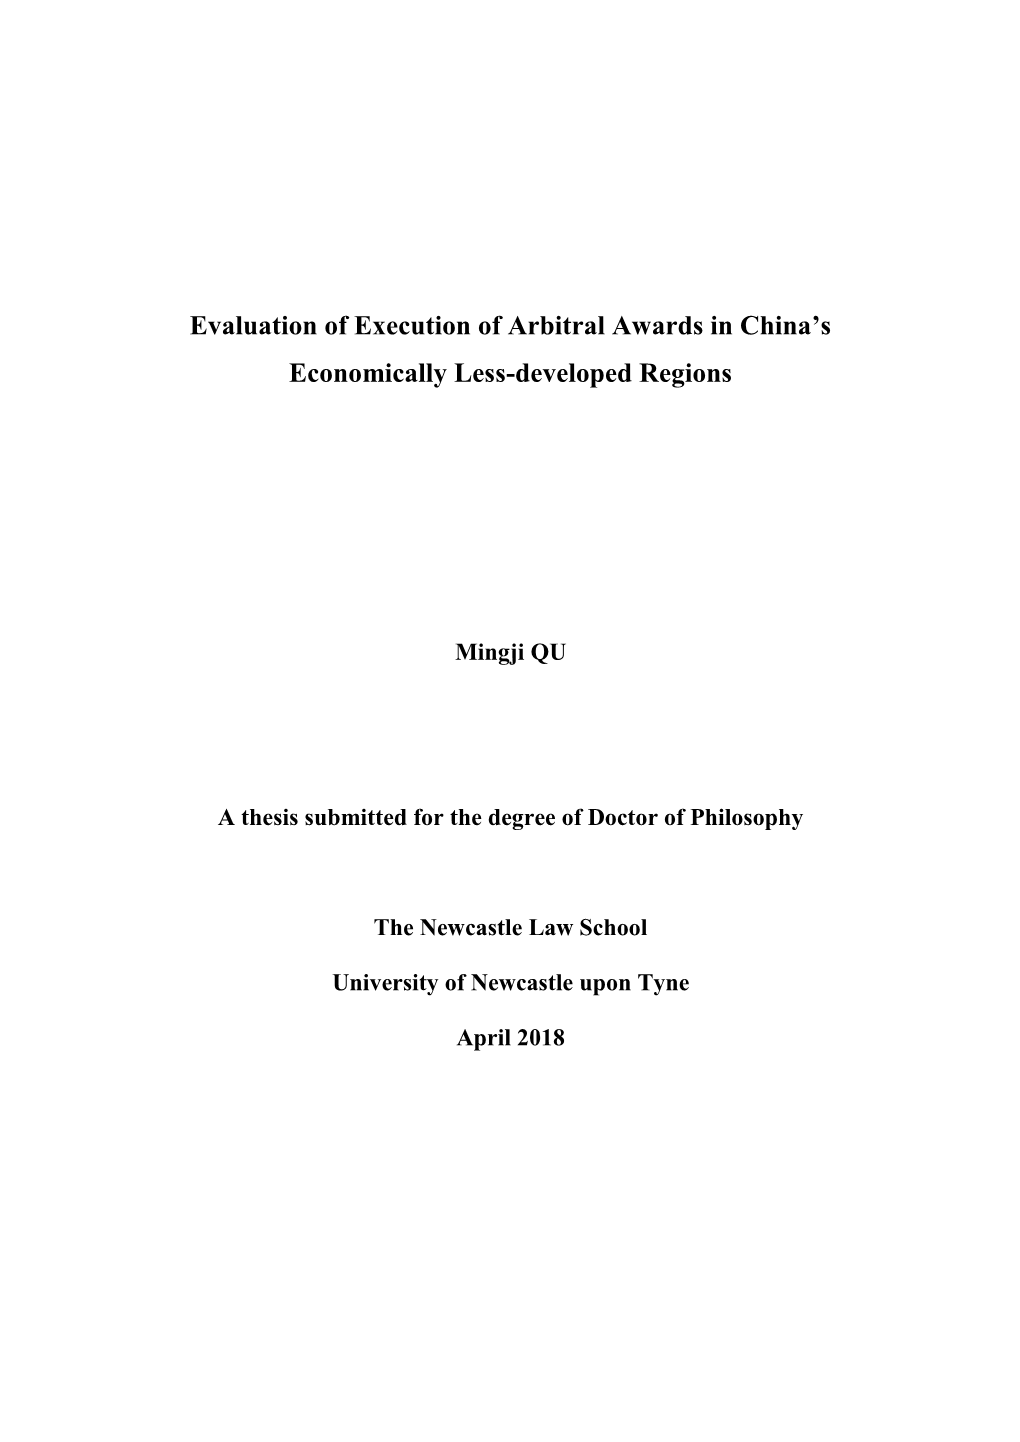 Evaluation of Execution of Arbitral Awards in China's Economically Less-Developed Regions